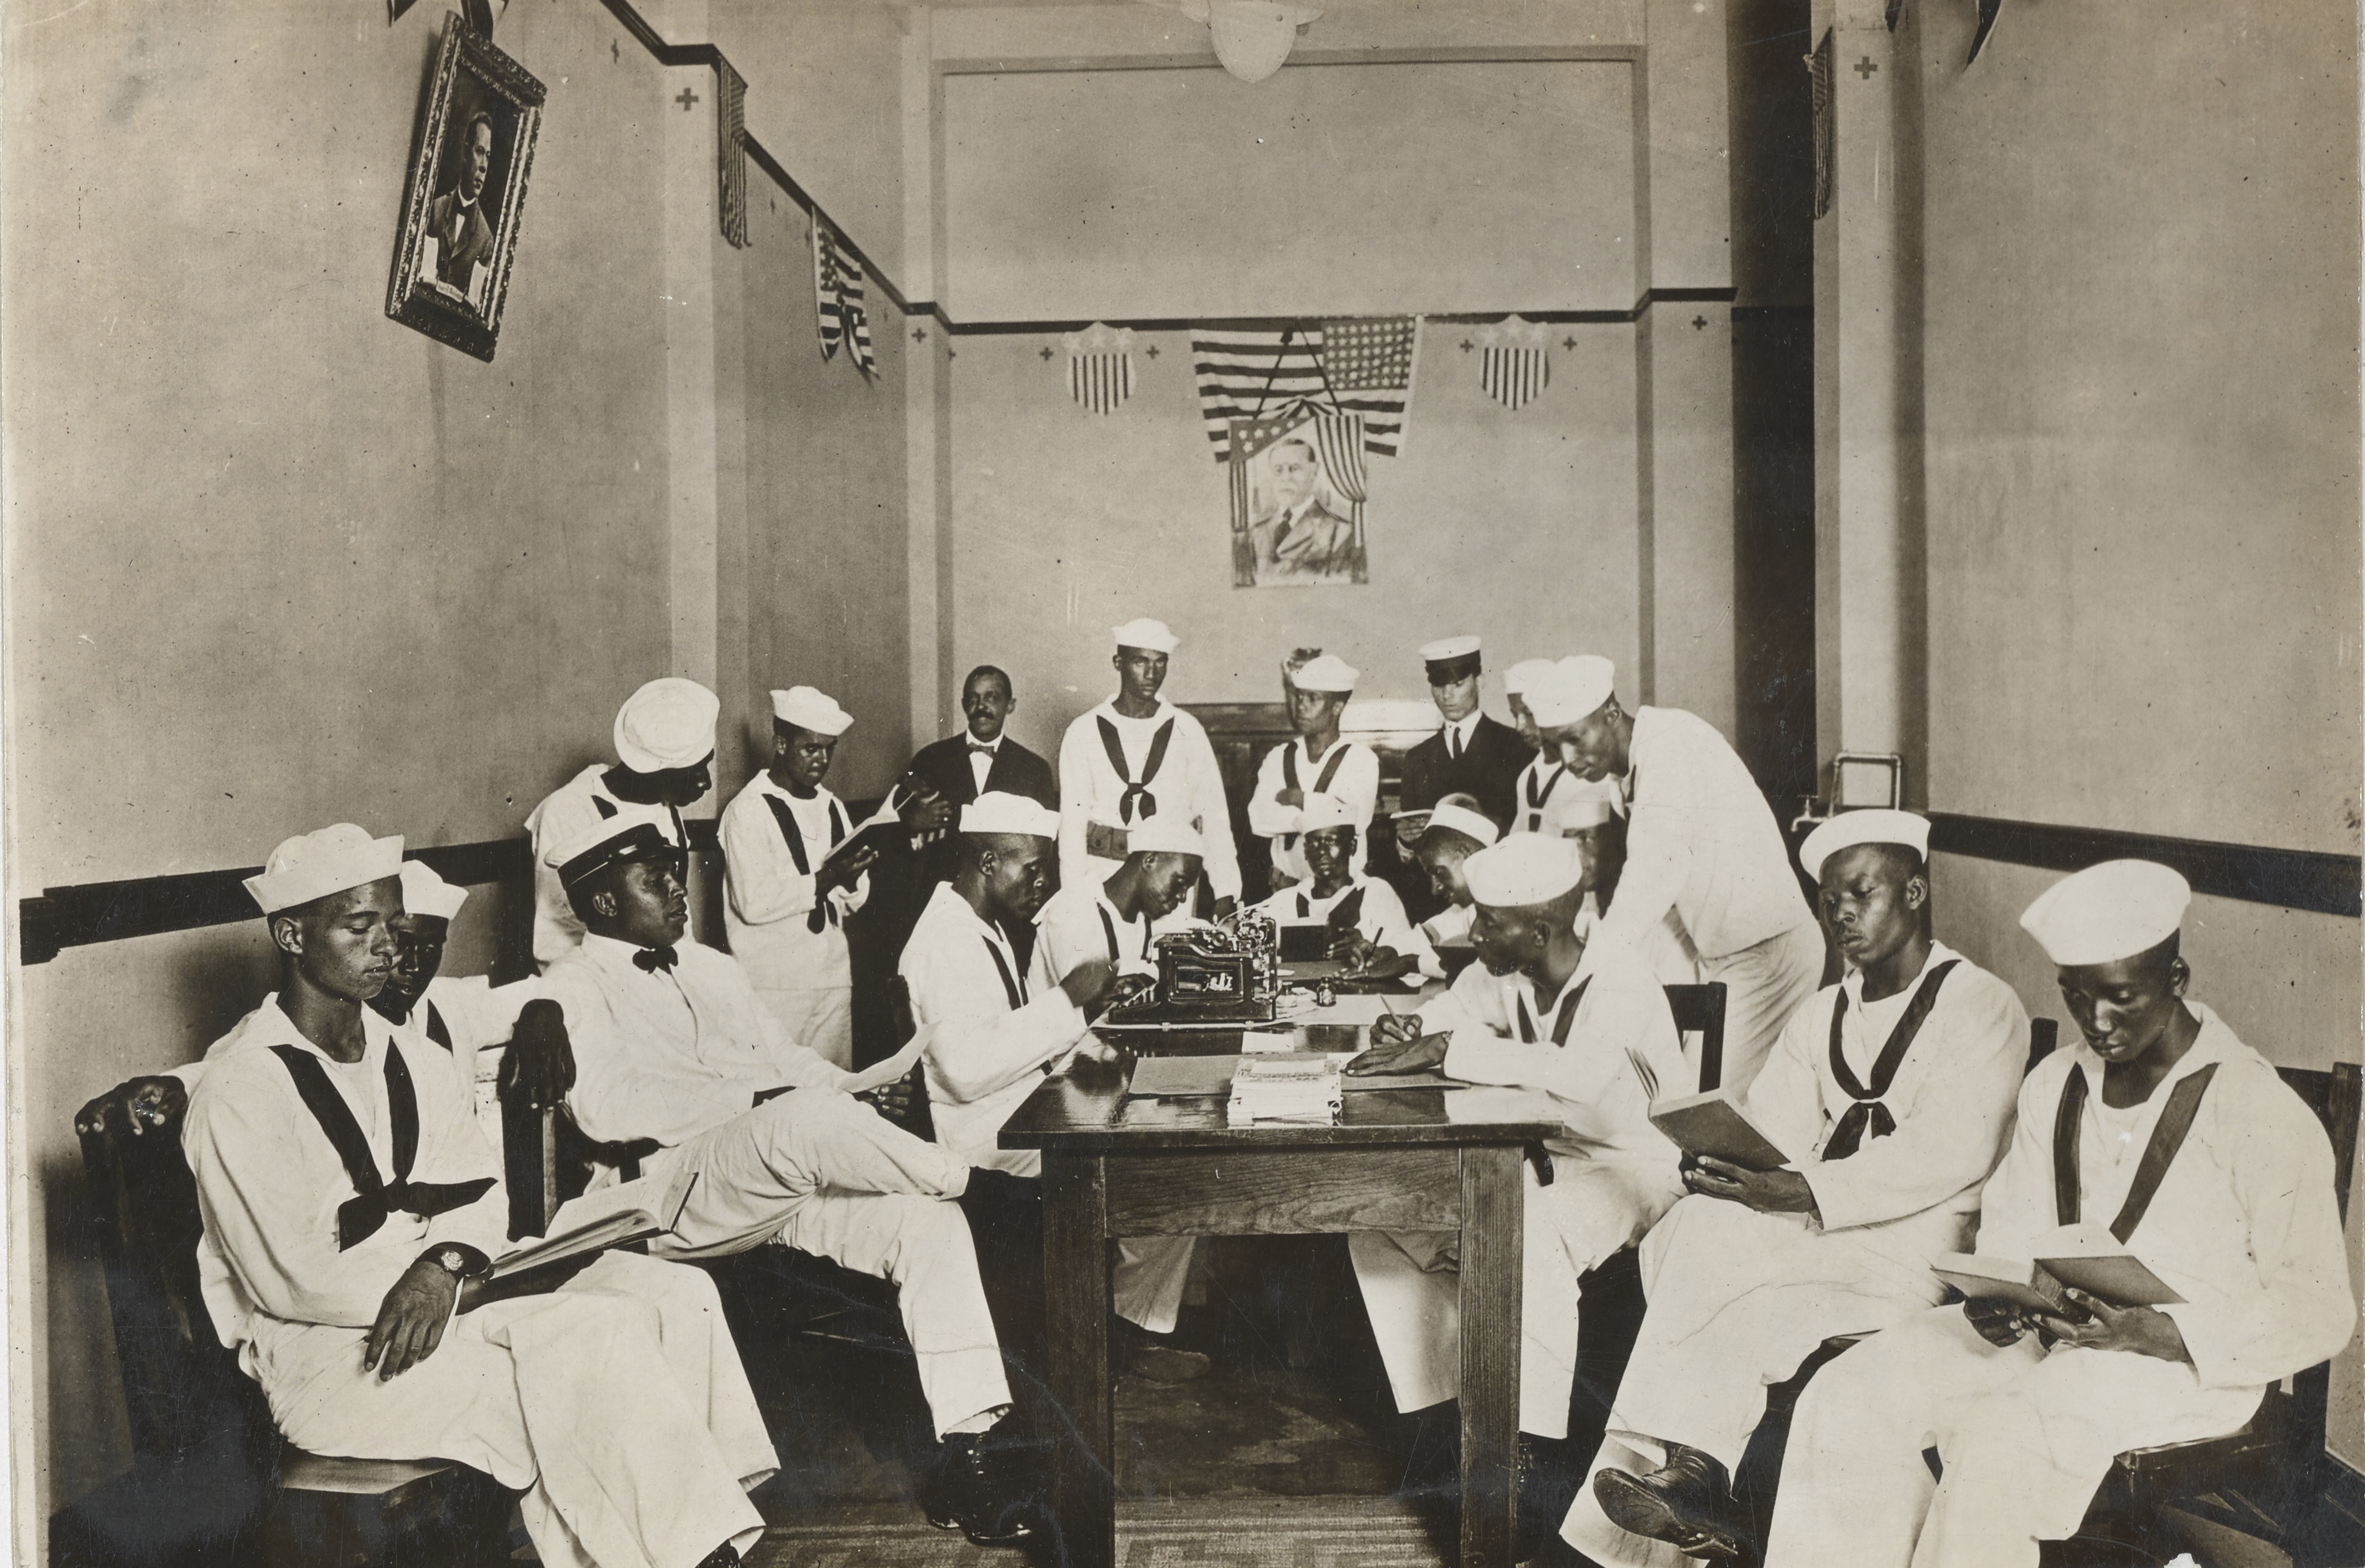 Sailors reading, writing, and relaxing at the Red Cross Rest Room in New Orleans 
National Archives (165-WW-127A-016)